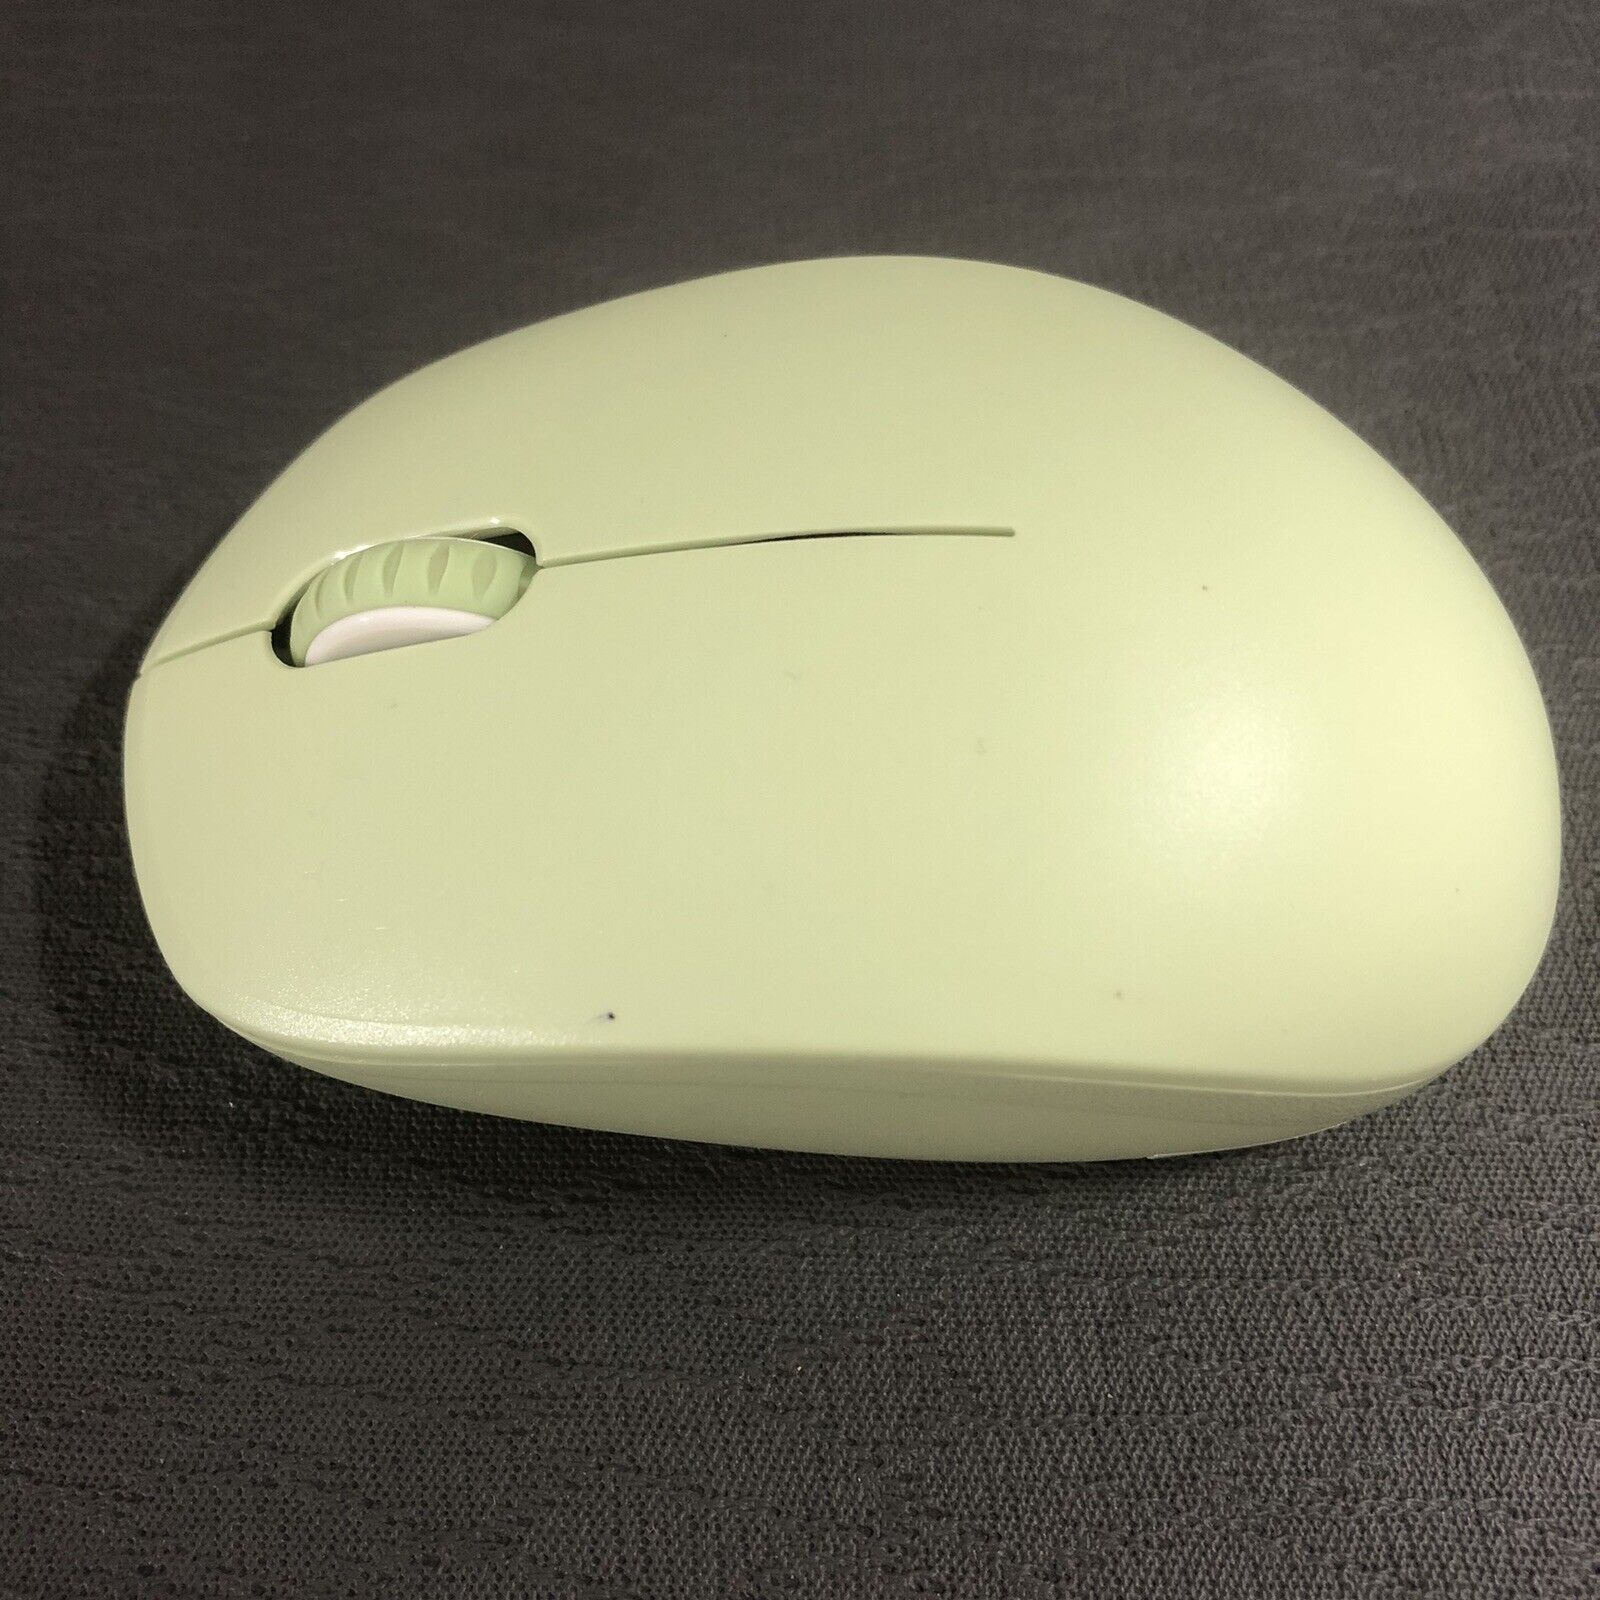 Seenda Noiseless Wireless Mouse with USB Receiver in Light Green PC Laptop 2.4G